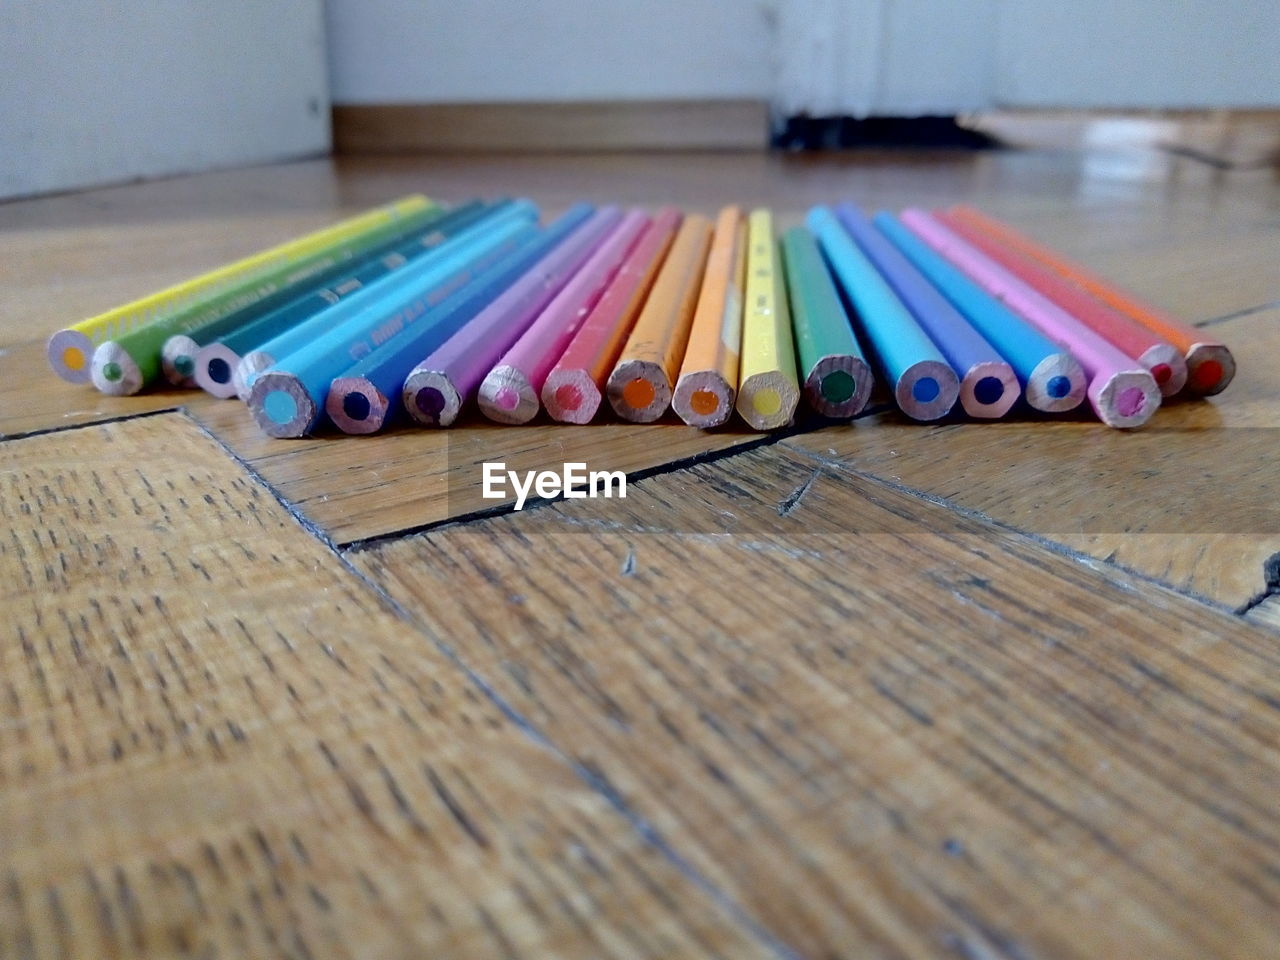 CLOSE-UP OF PENCILS ON TABLE